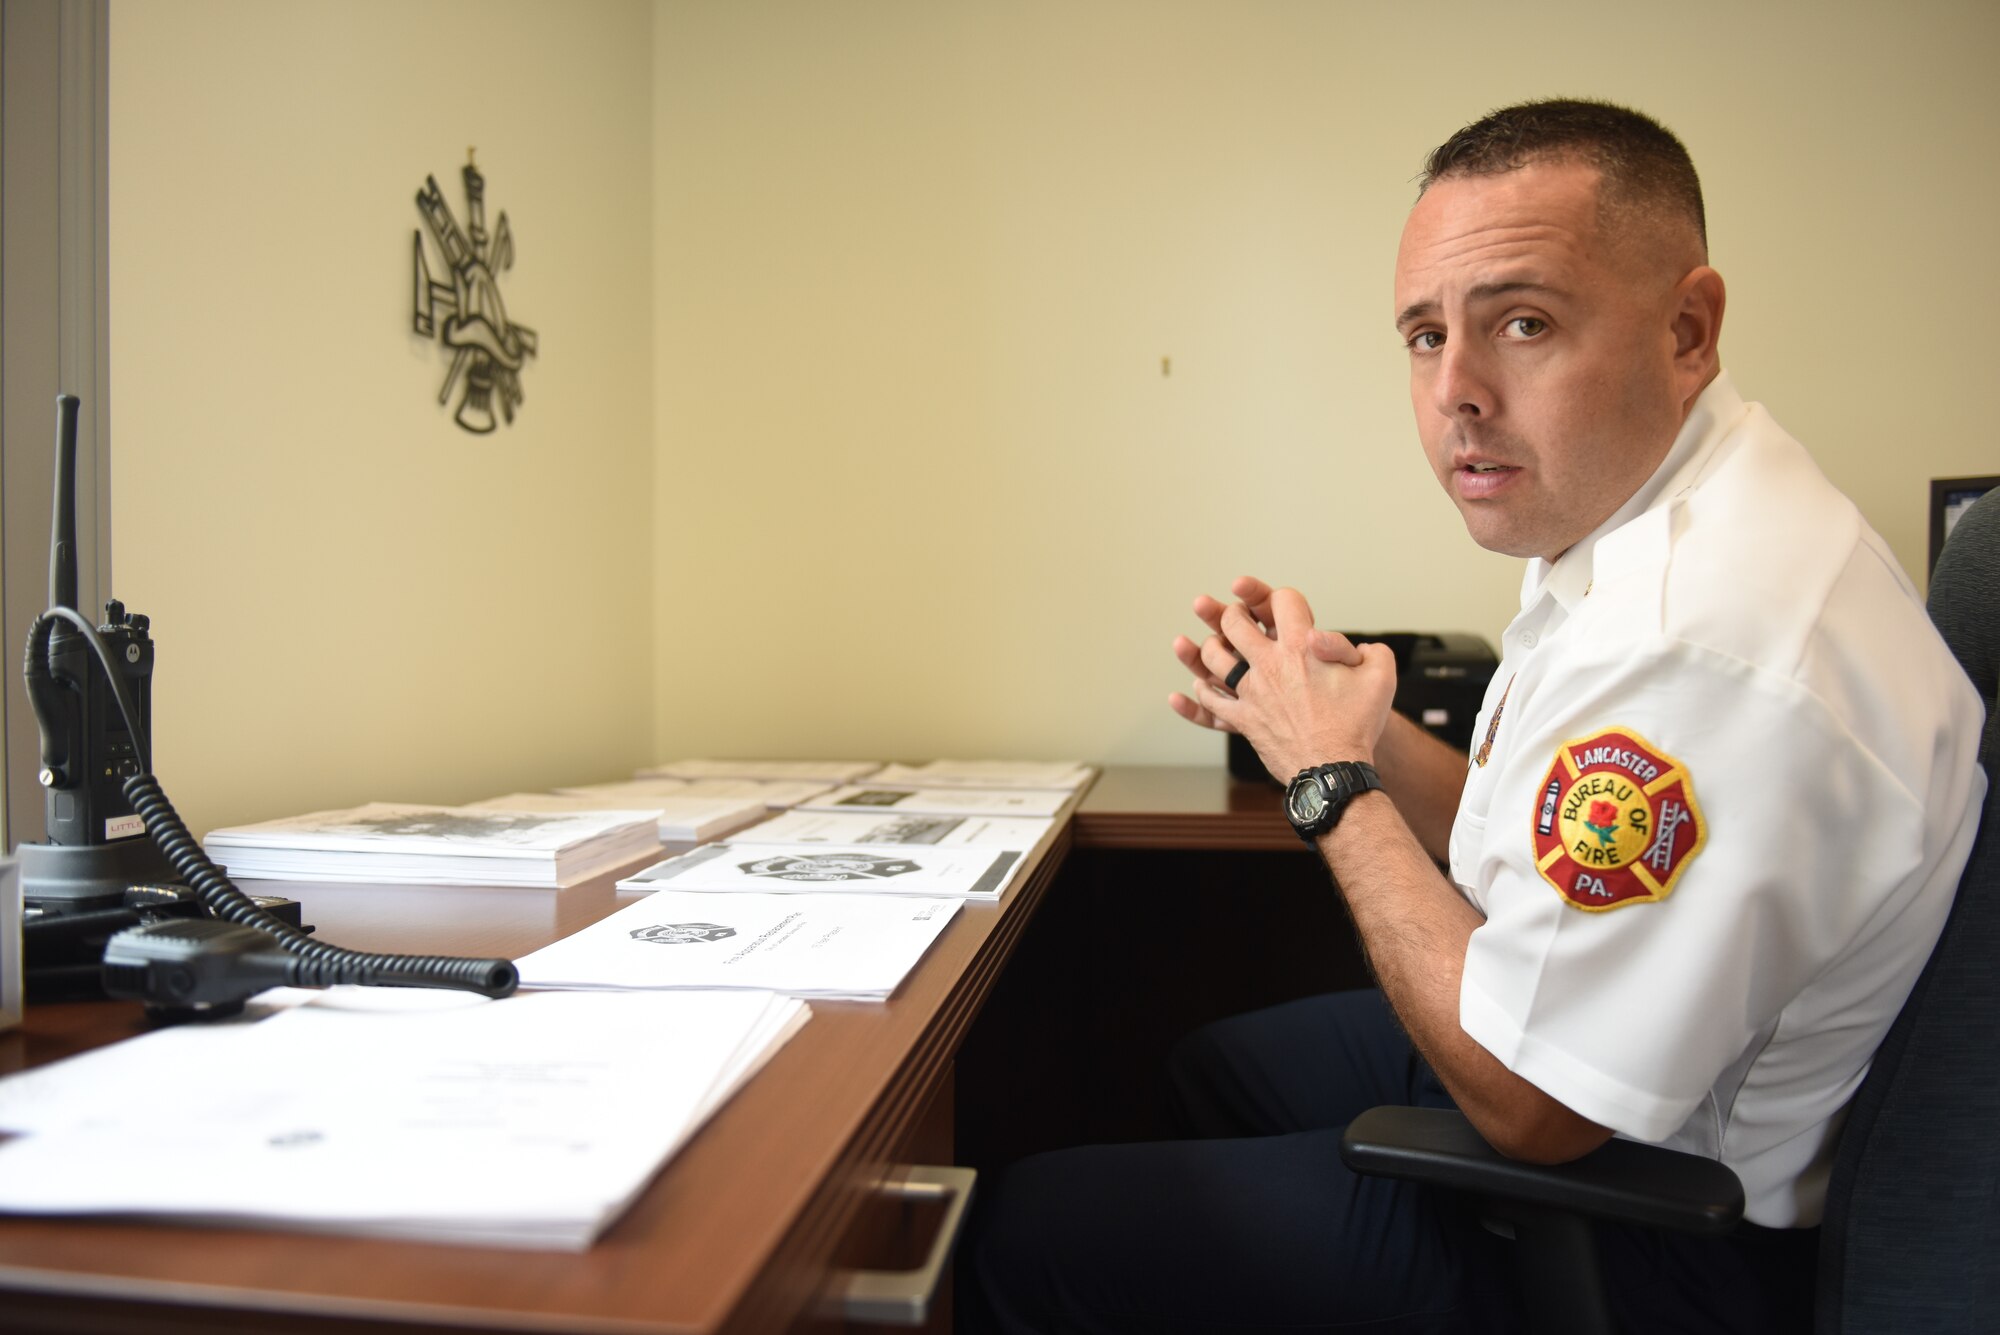 Scott Little, fire chief of Lancaster’s Bureau of Fire, explains various policies and programs that he is working on implementing at the bureau Aug. 21, 2018, Lancaster, Pennsylvania. Little has plans for a number of outreach initiatives, including a citizens’ fire academy, a community engagement program and a youth mentorship program for middle school and high school students. (U.S. Air National Guard photo by Senior Airman Julia Sorber/Released)